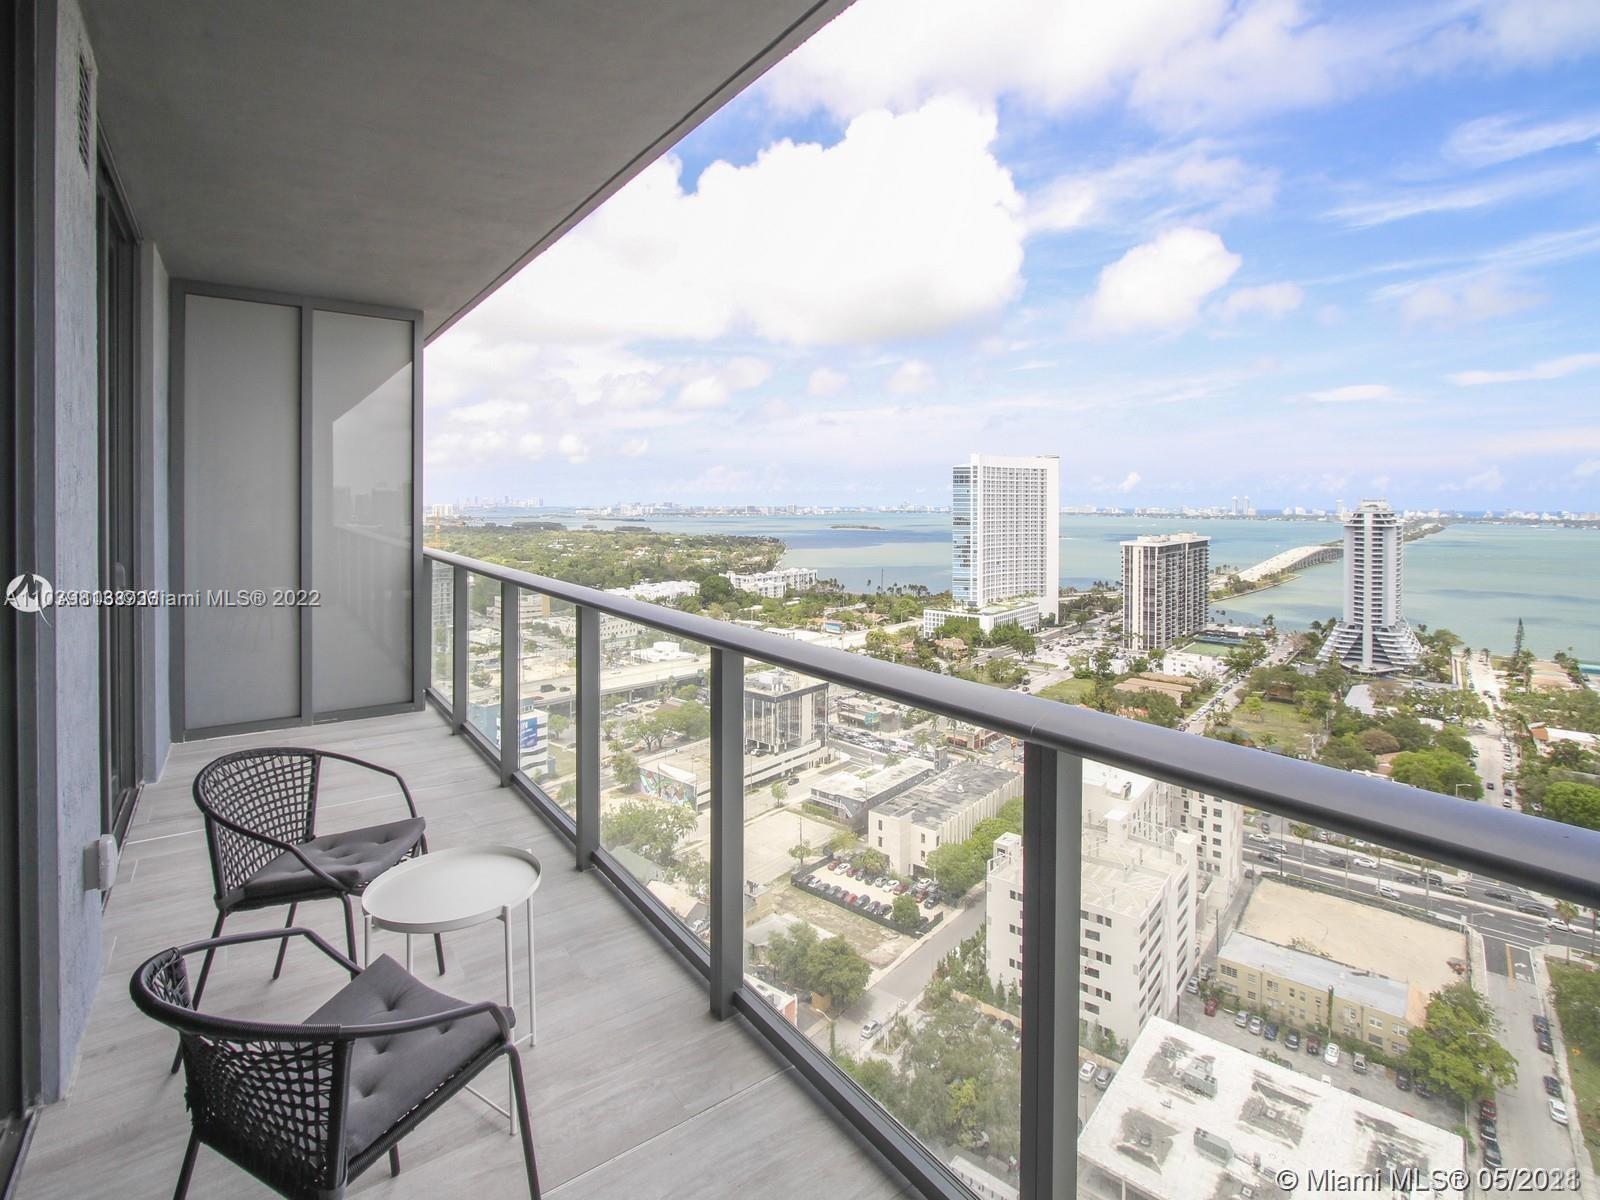 JUST REDUCED THE PRICE! The most desirable view, furnished unit at new HYDE Midtown. 1 Bed/2 Bath + 